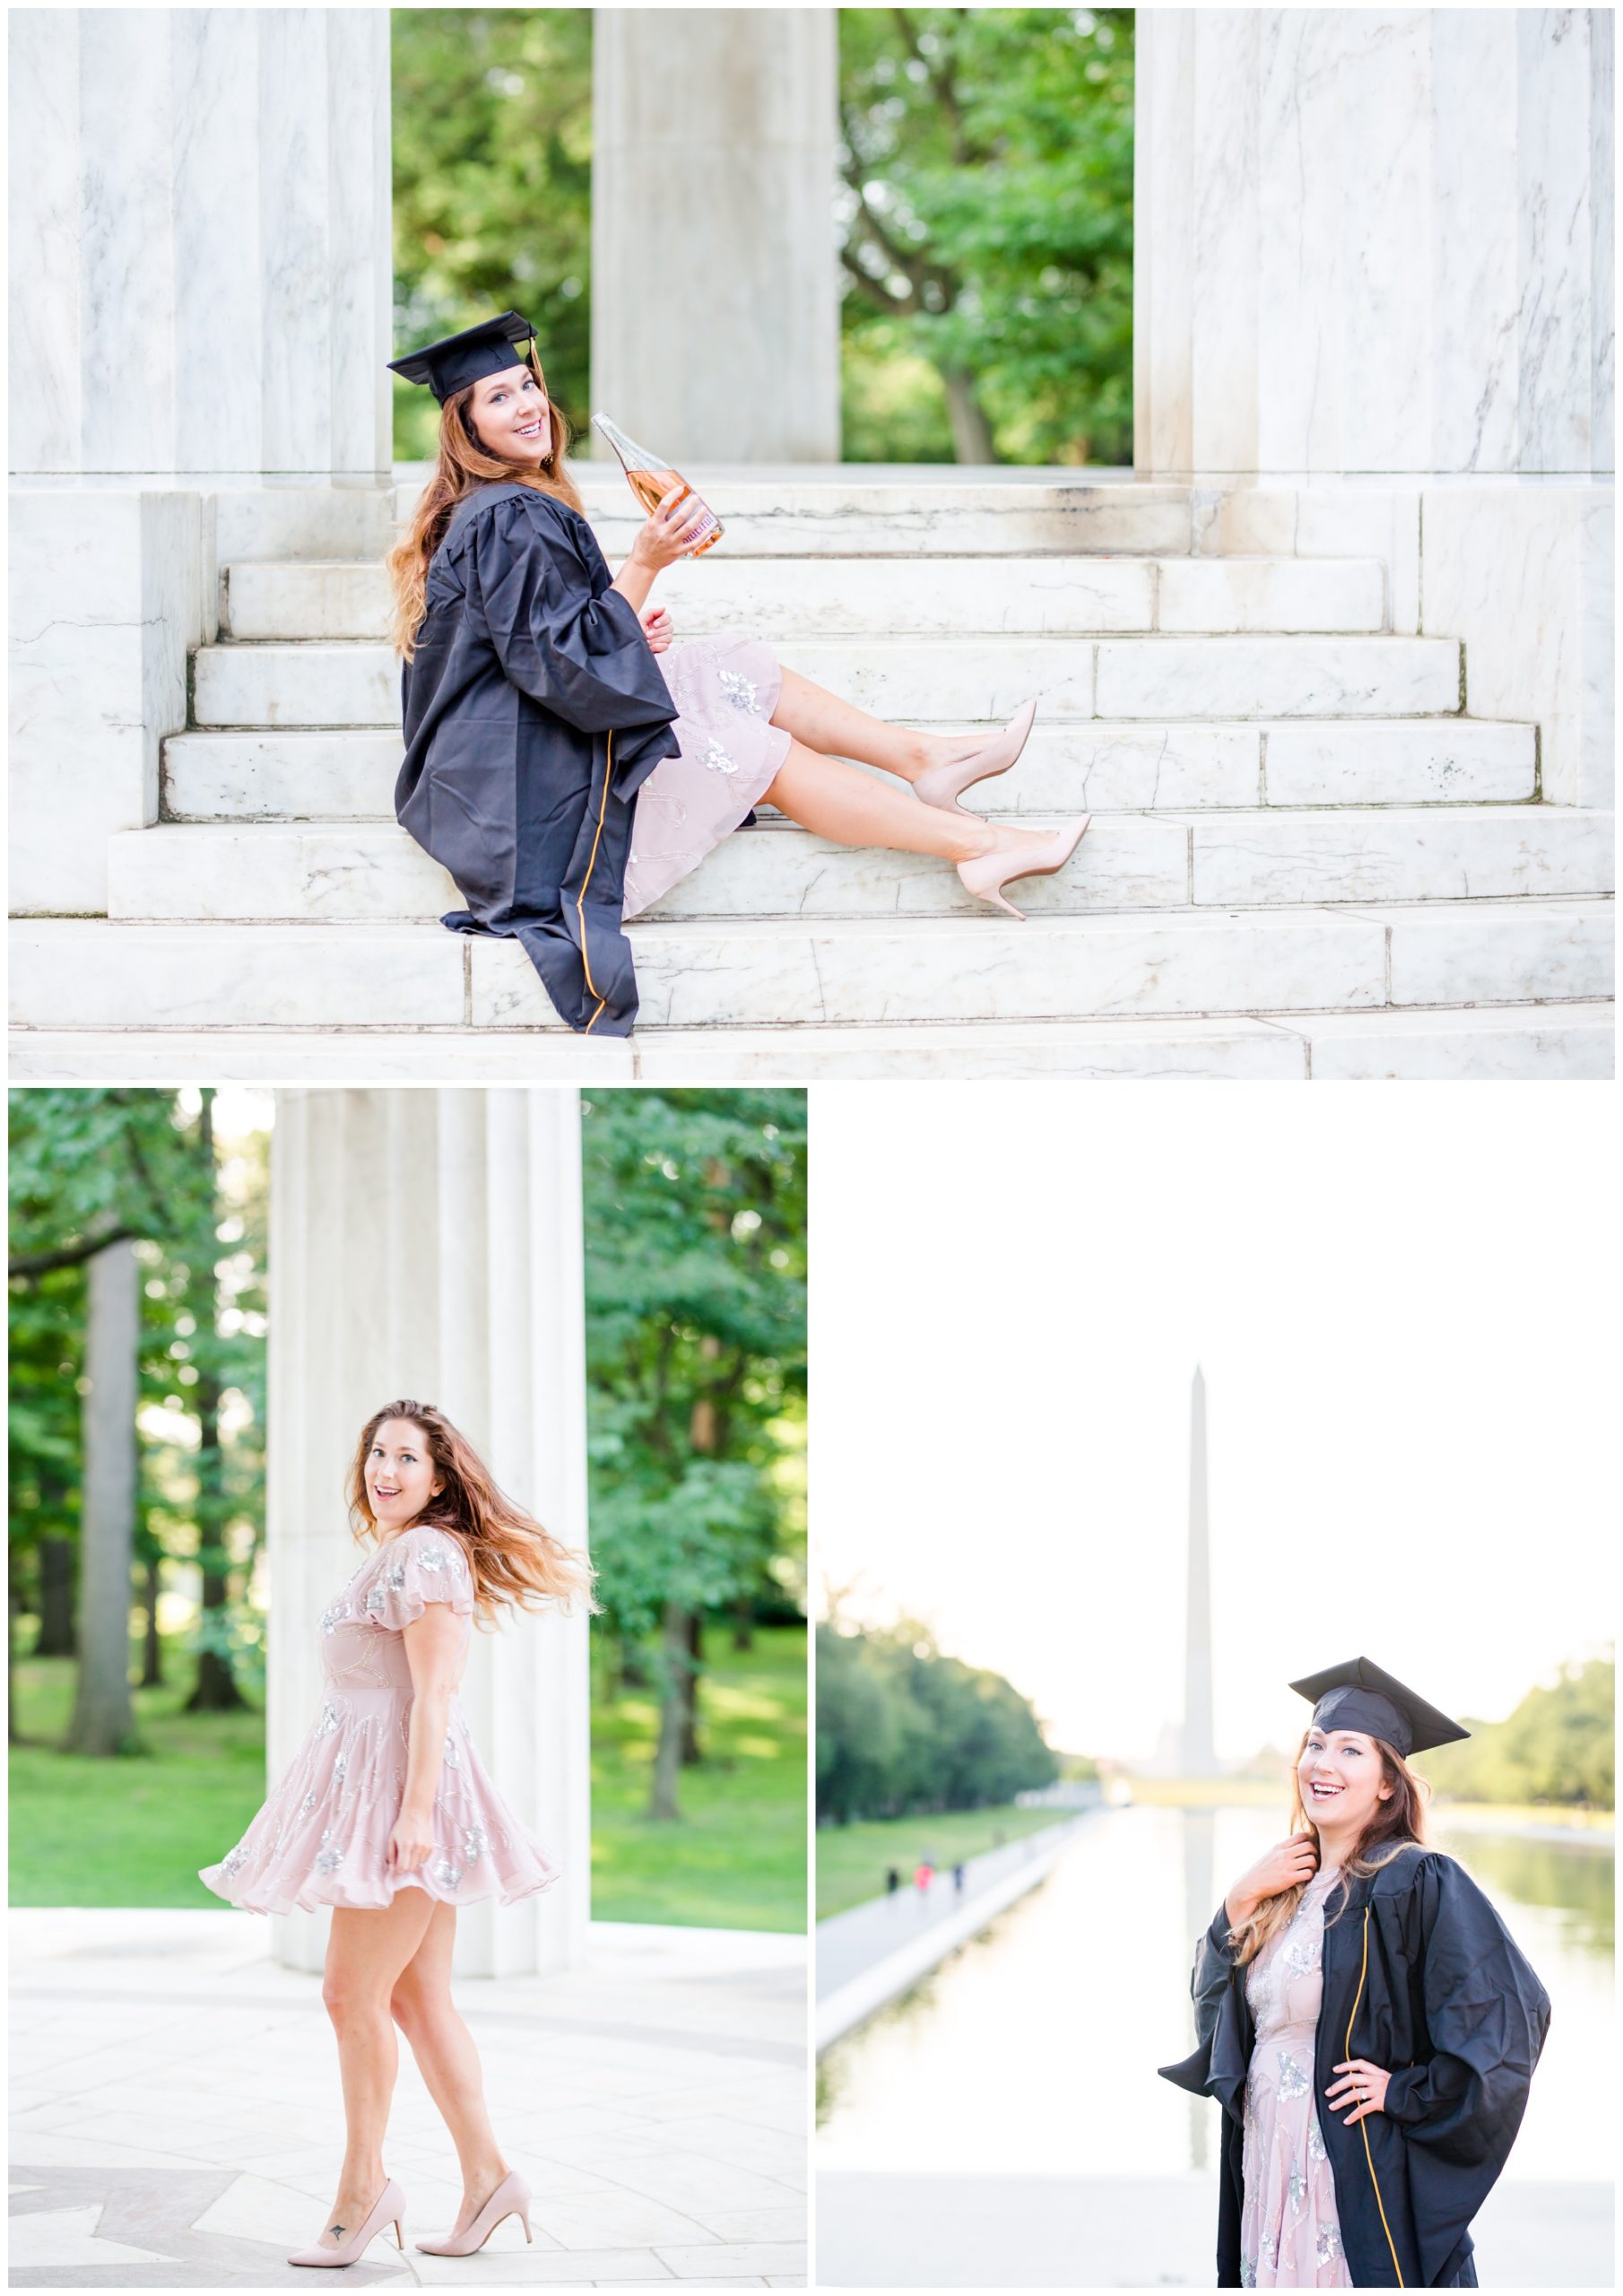 graduation photo tips, D.C. graduates, Washington D.C. universities, graduation photos in D.C., graduation photography, graduation portraits, D.C. graduation, Rachel E.H. Photography, woman with champagne, lace pink dress, woman in front of reflecting pool, woman smiling, woman graduate